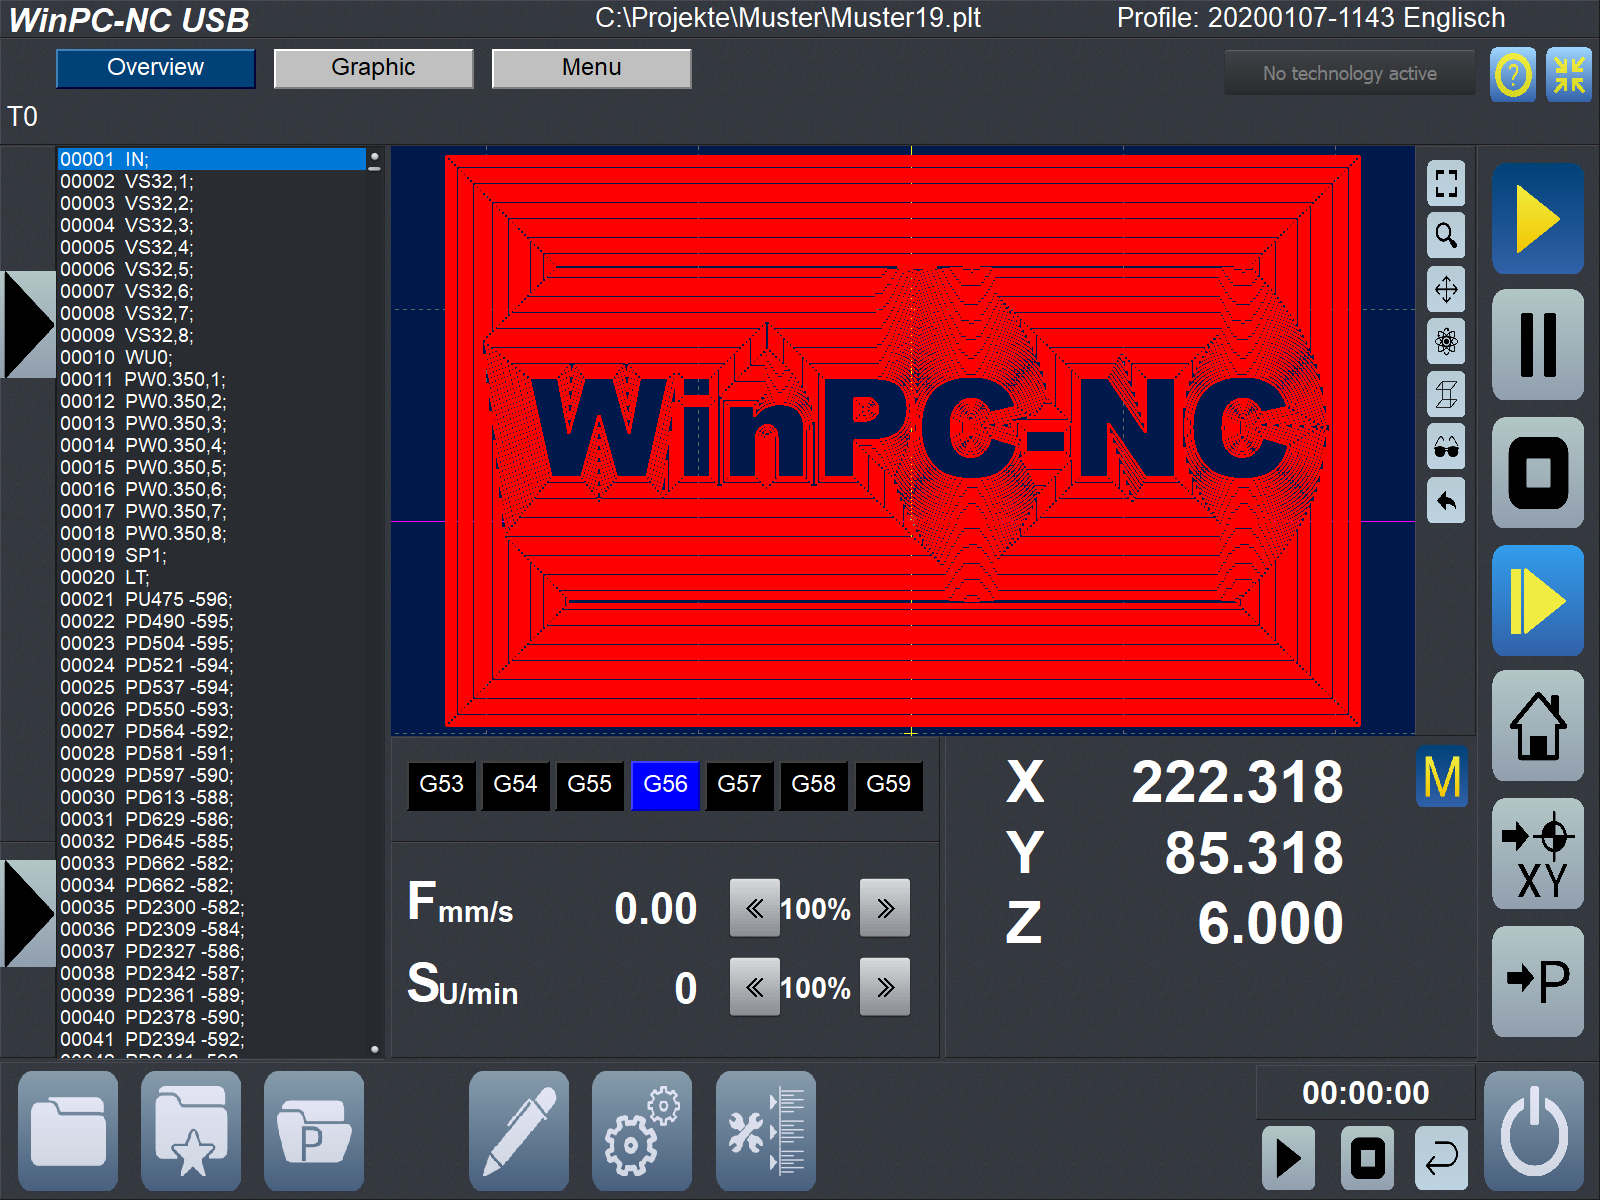 WinPC-NC USB Update from V2/3 to Version 4.x 